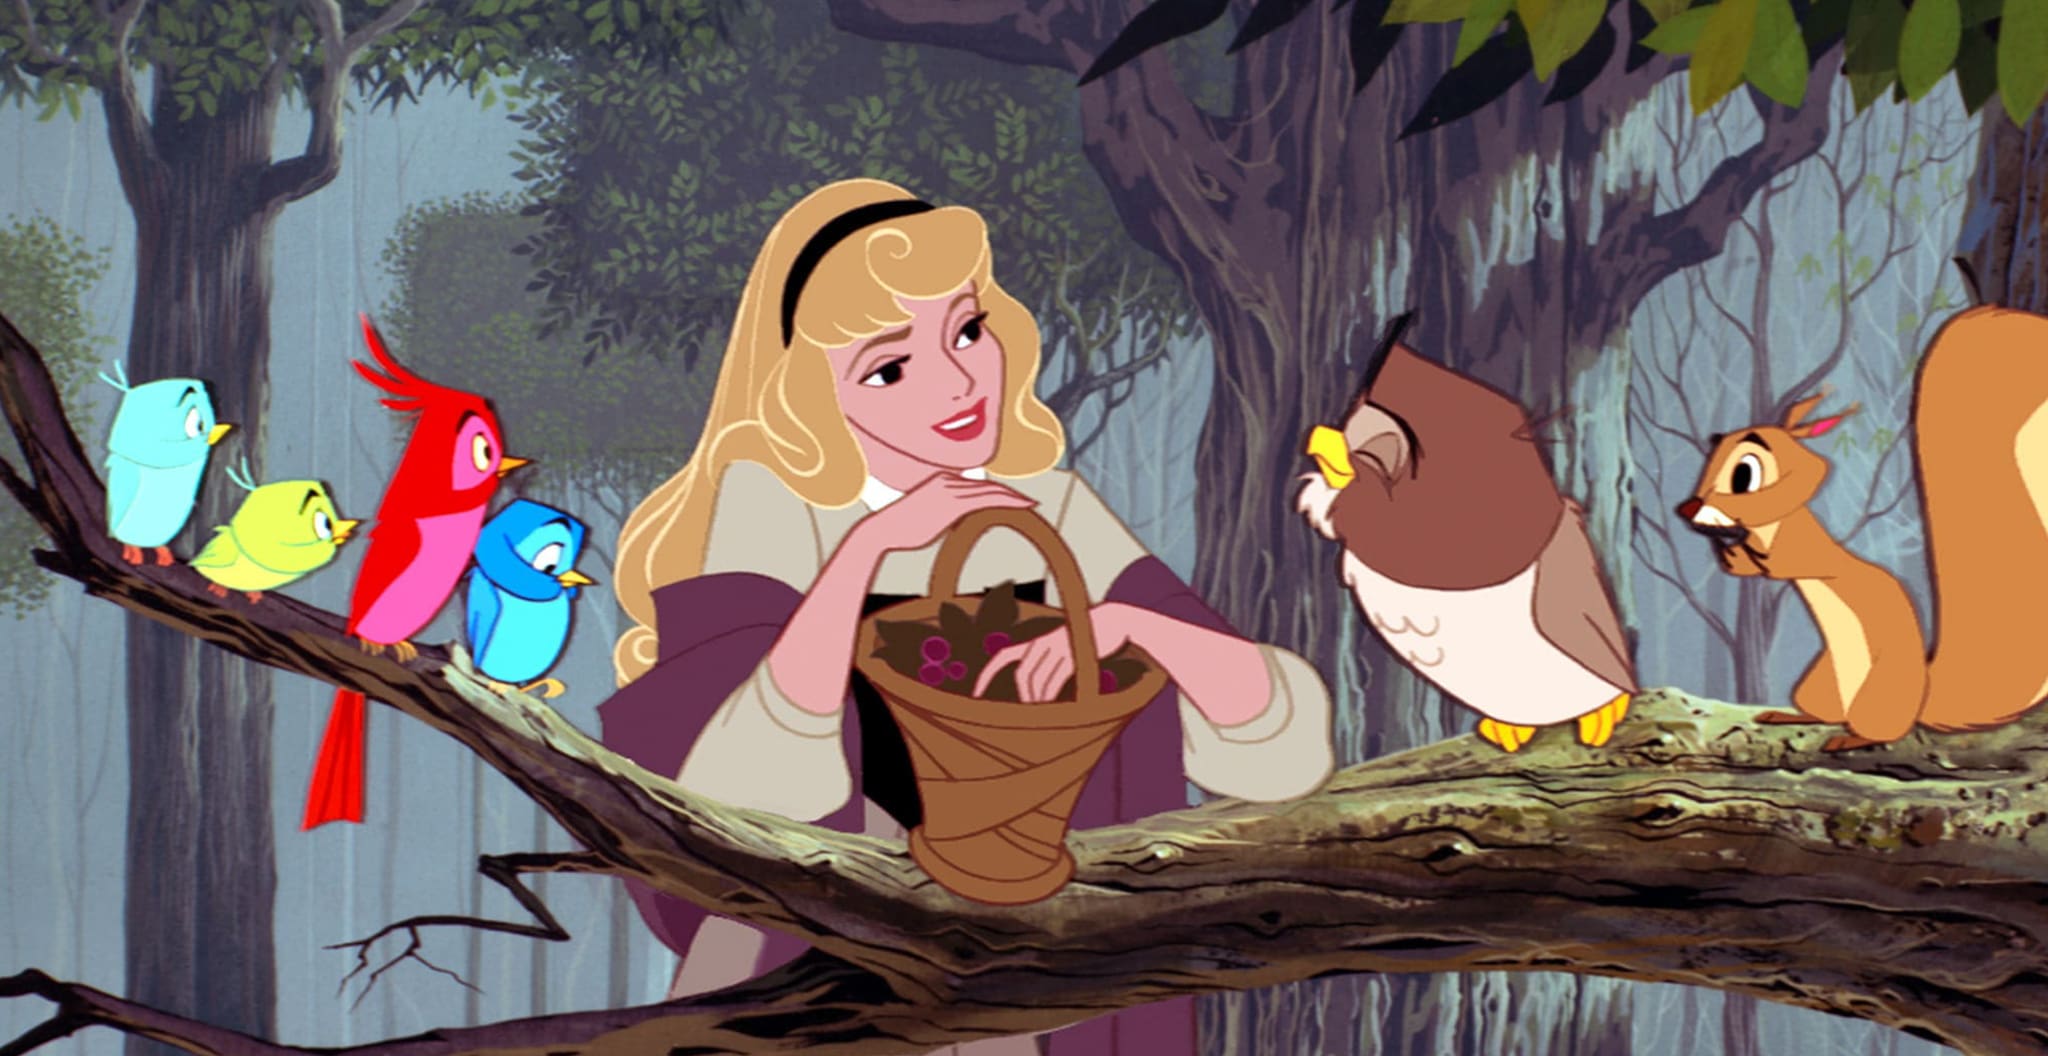 Aurora stands in the forest surrounded by birds on a branch.